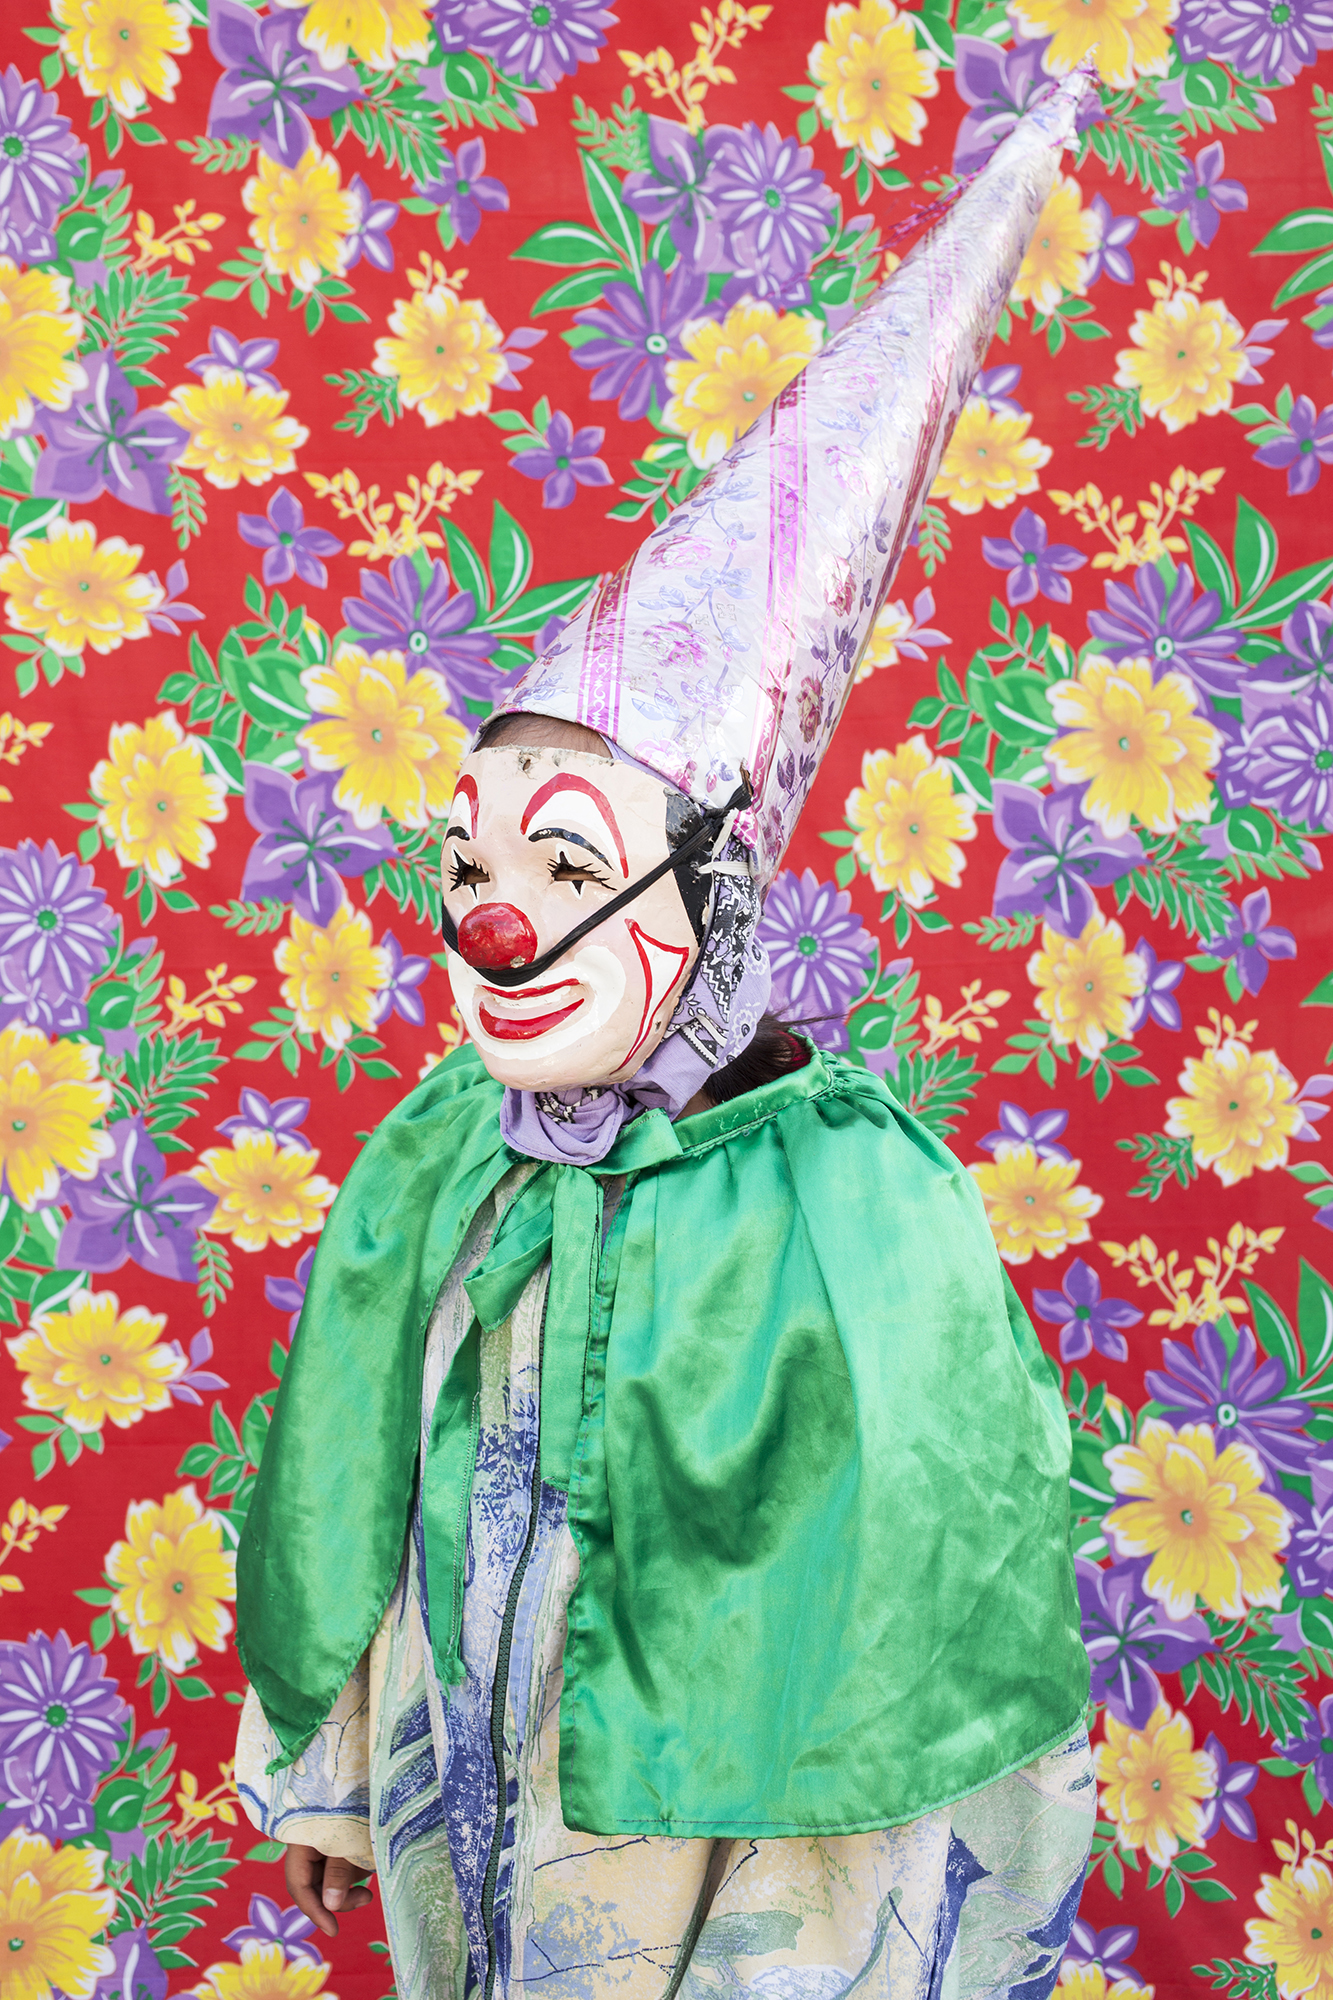  Portrait of dancing clown with the typical costume. When they use their masks they prefer not to reveal their identity. From the gang "Cuadrilla de Juquilita", Coatepec, Veracruz, Mexico, 2016. 